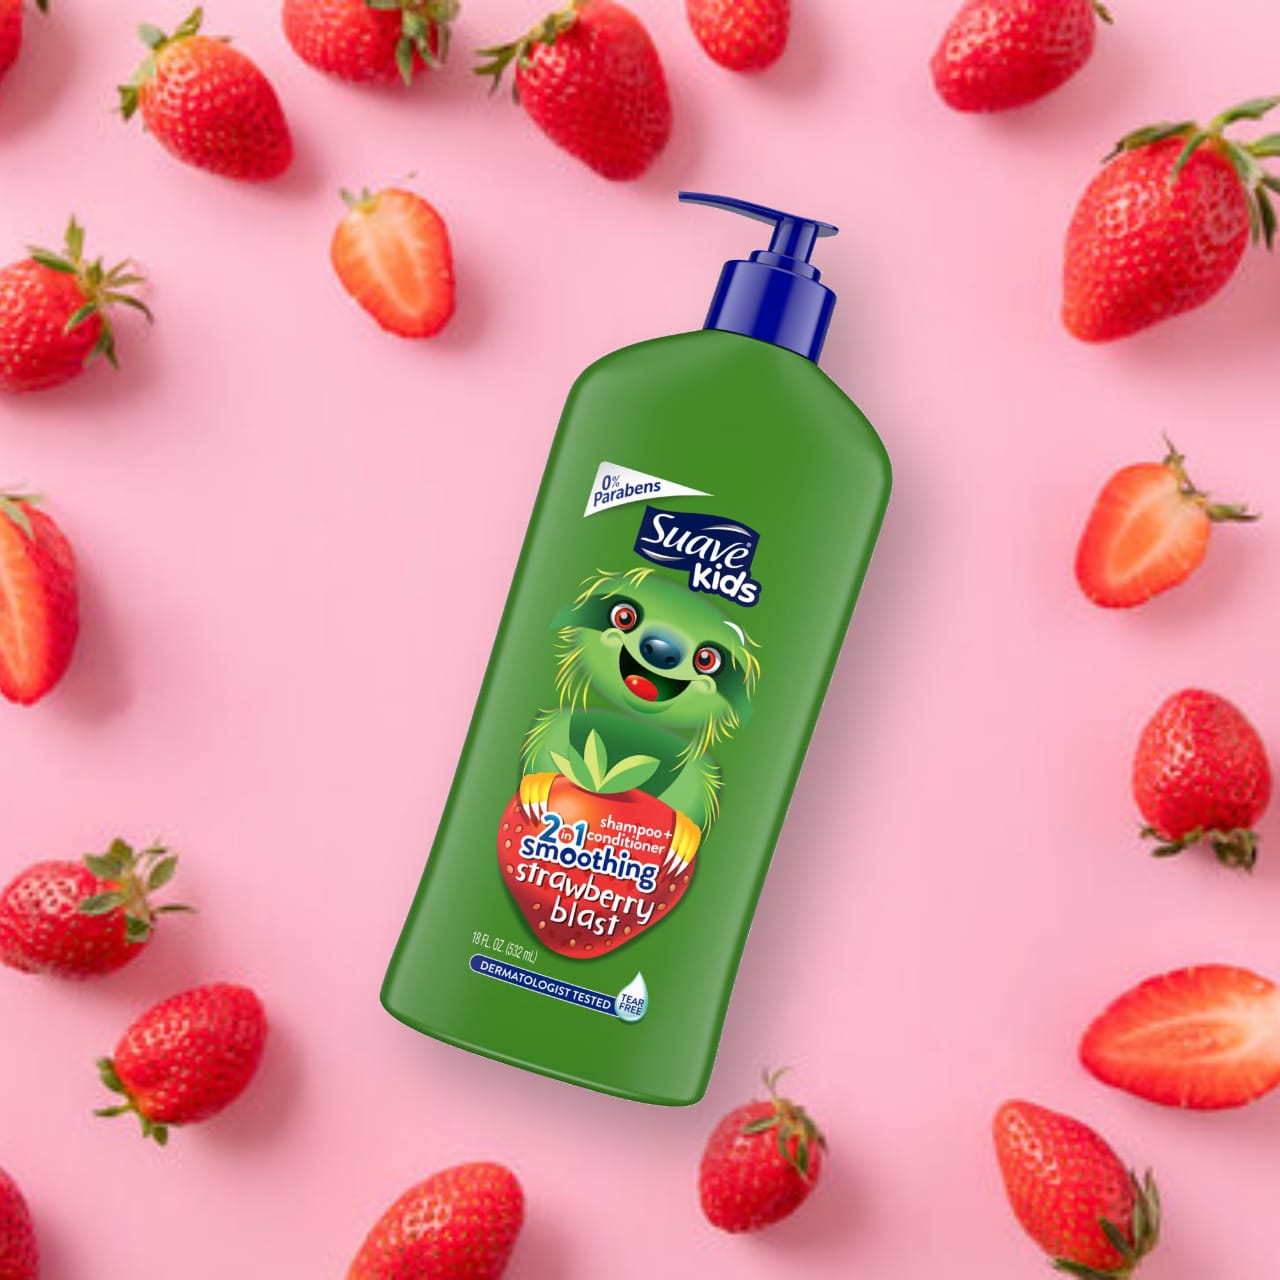 Suave Kids 2in1 Shampoo + Conditioner Smoothing Strawberry Blast 532ml Green - Baby Moo